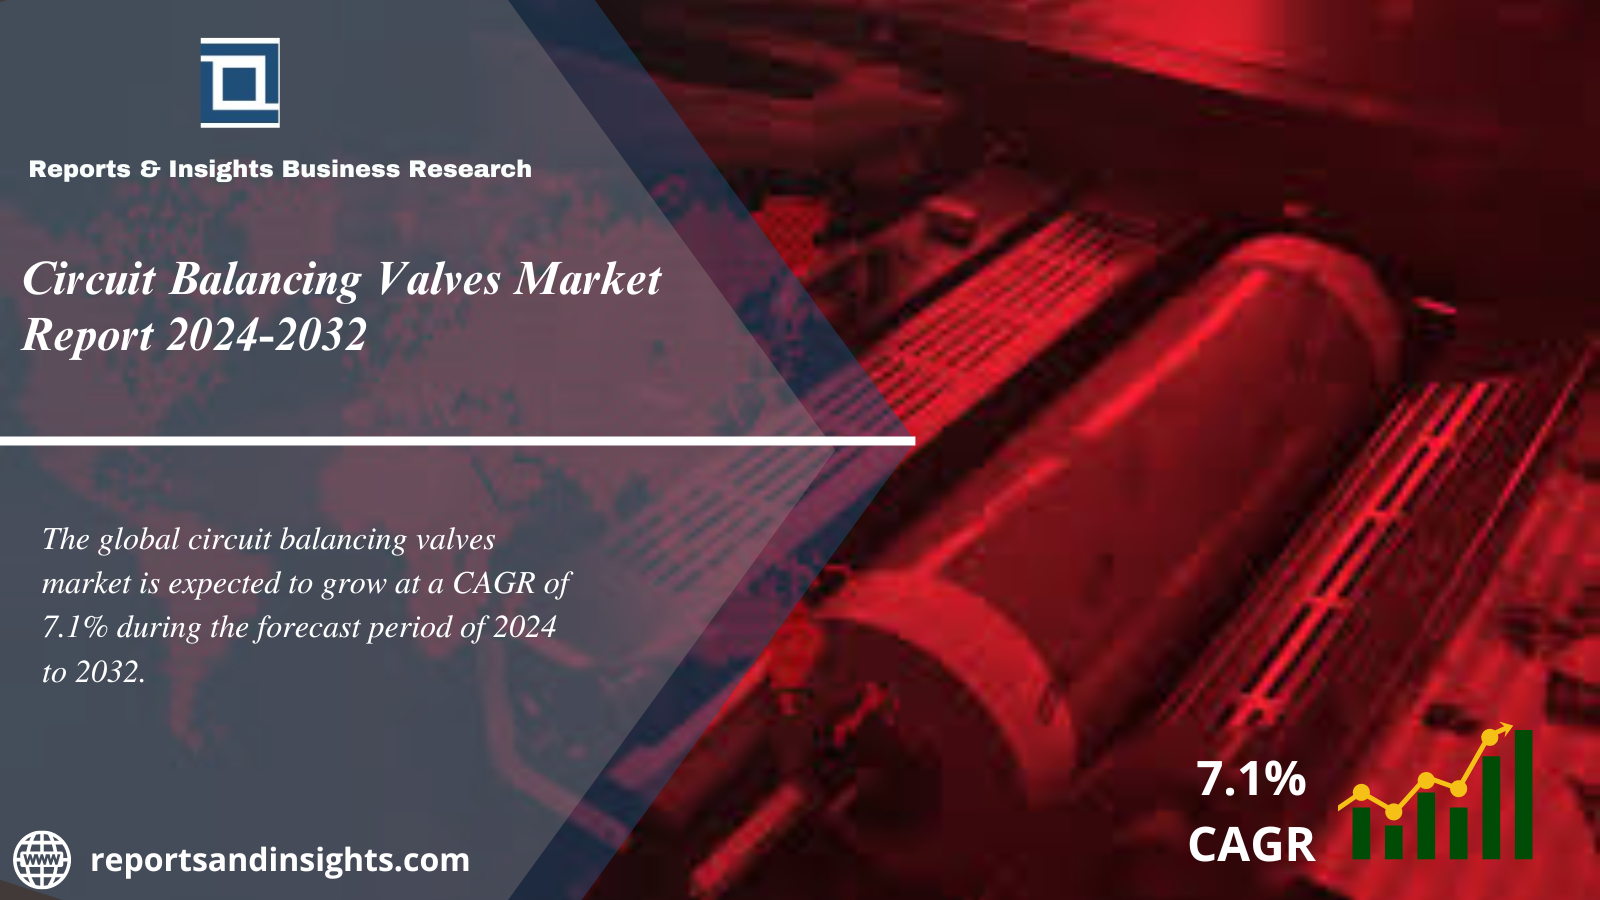 Circuit Balancing Valves Market Report, Size, Share, Trends, Growth and Forecast 2024 to 2032